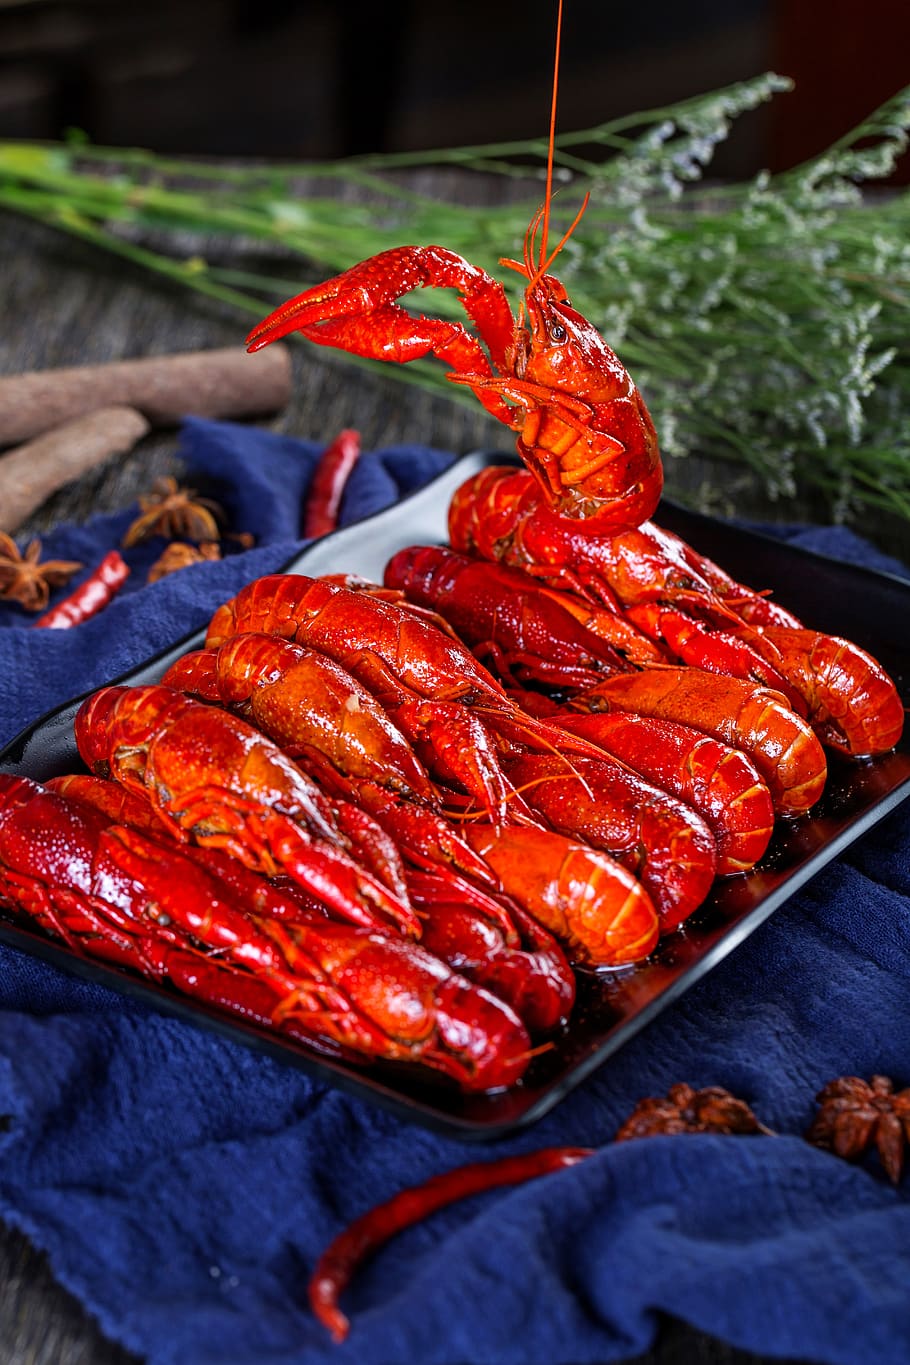 crayfish, shrimp inspector gadget, food and drink, food, red, freshness, crustacean, close-up, seafood, wellbeing